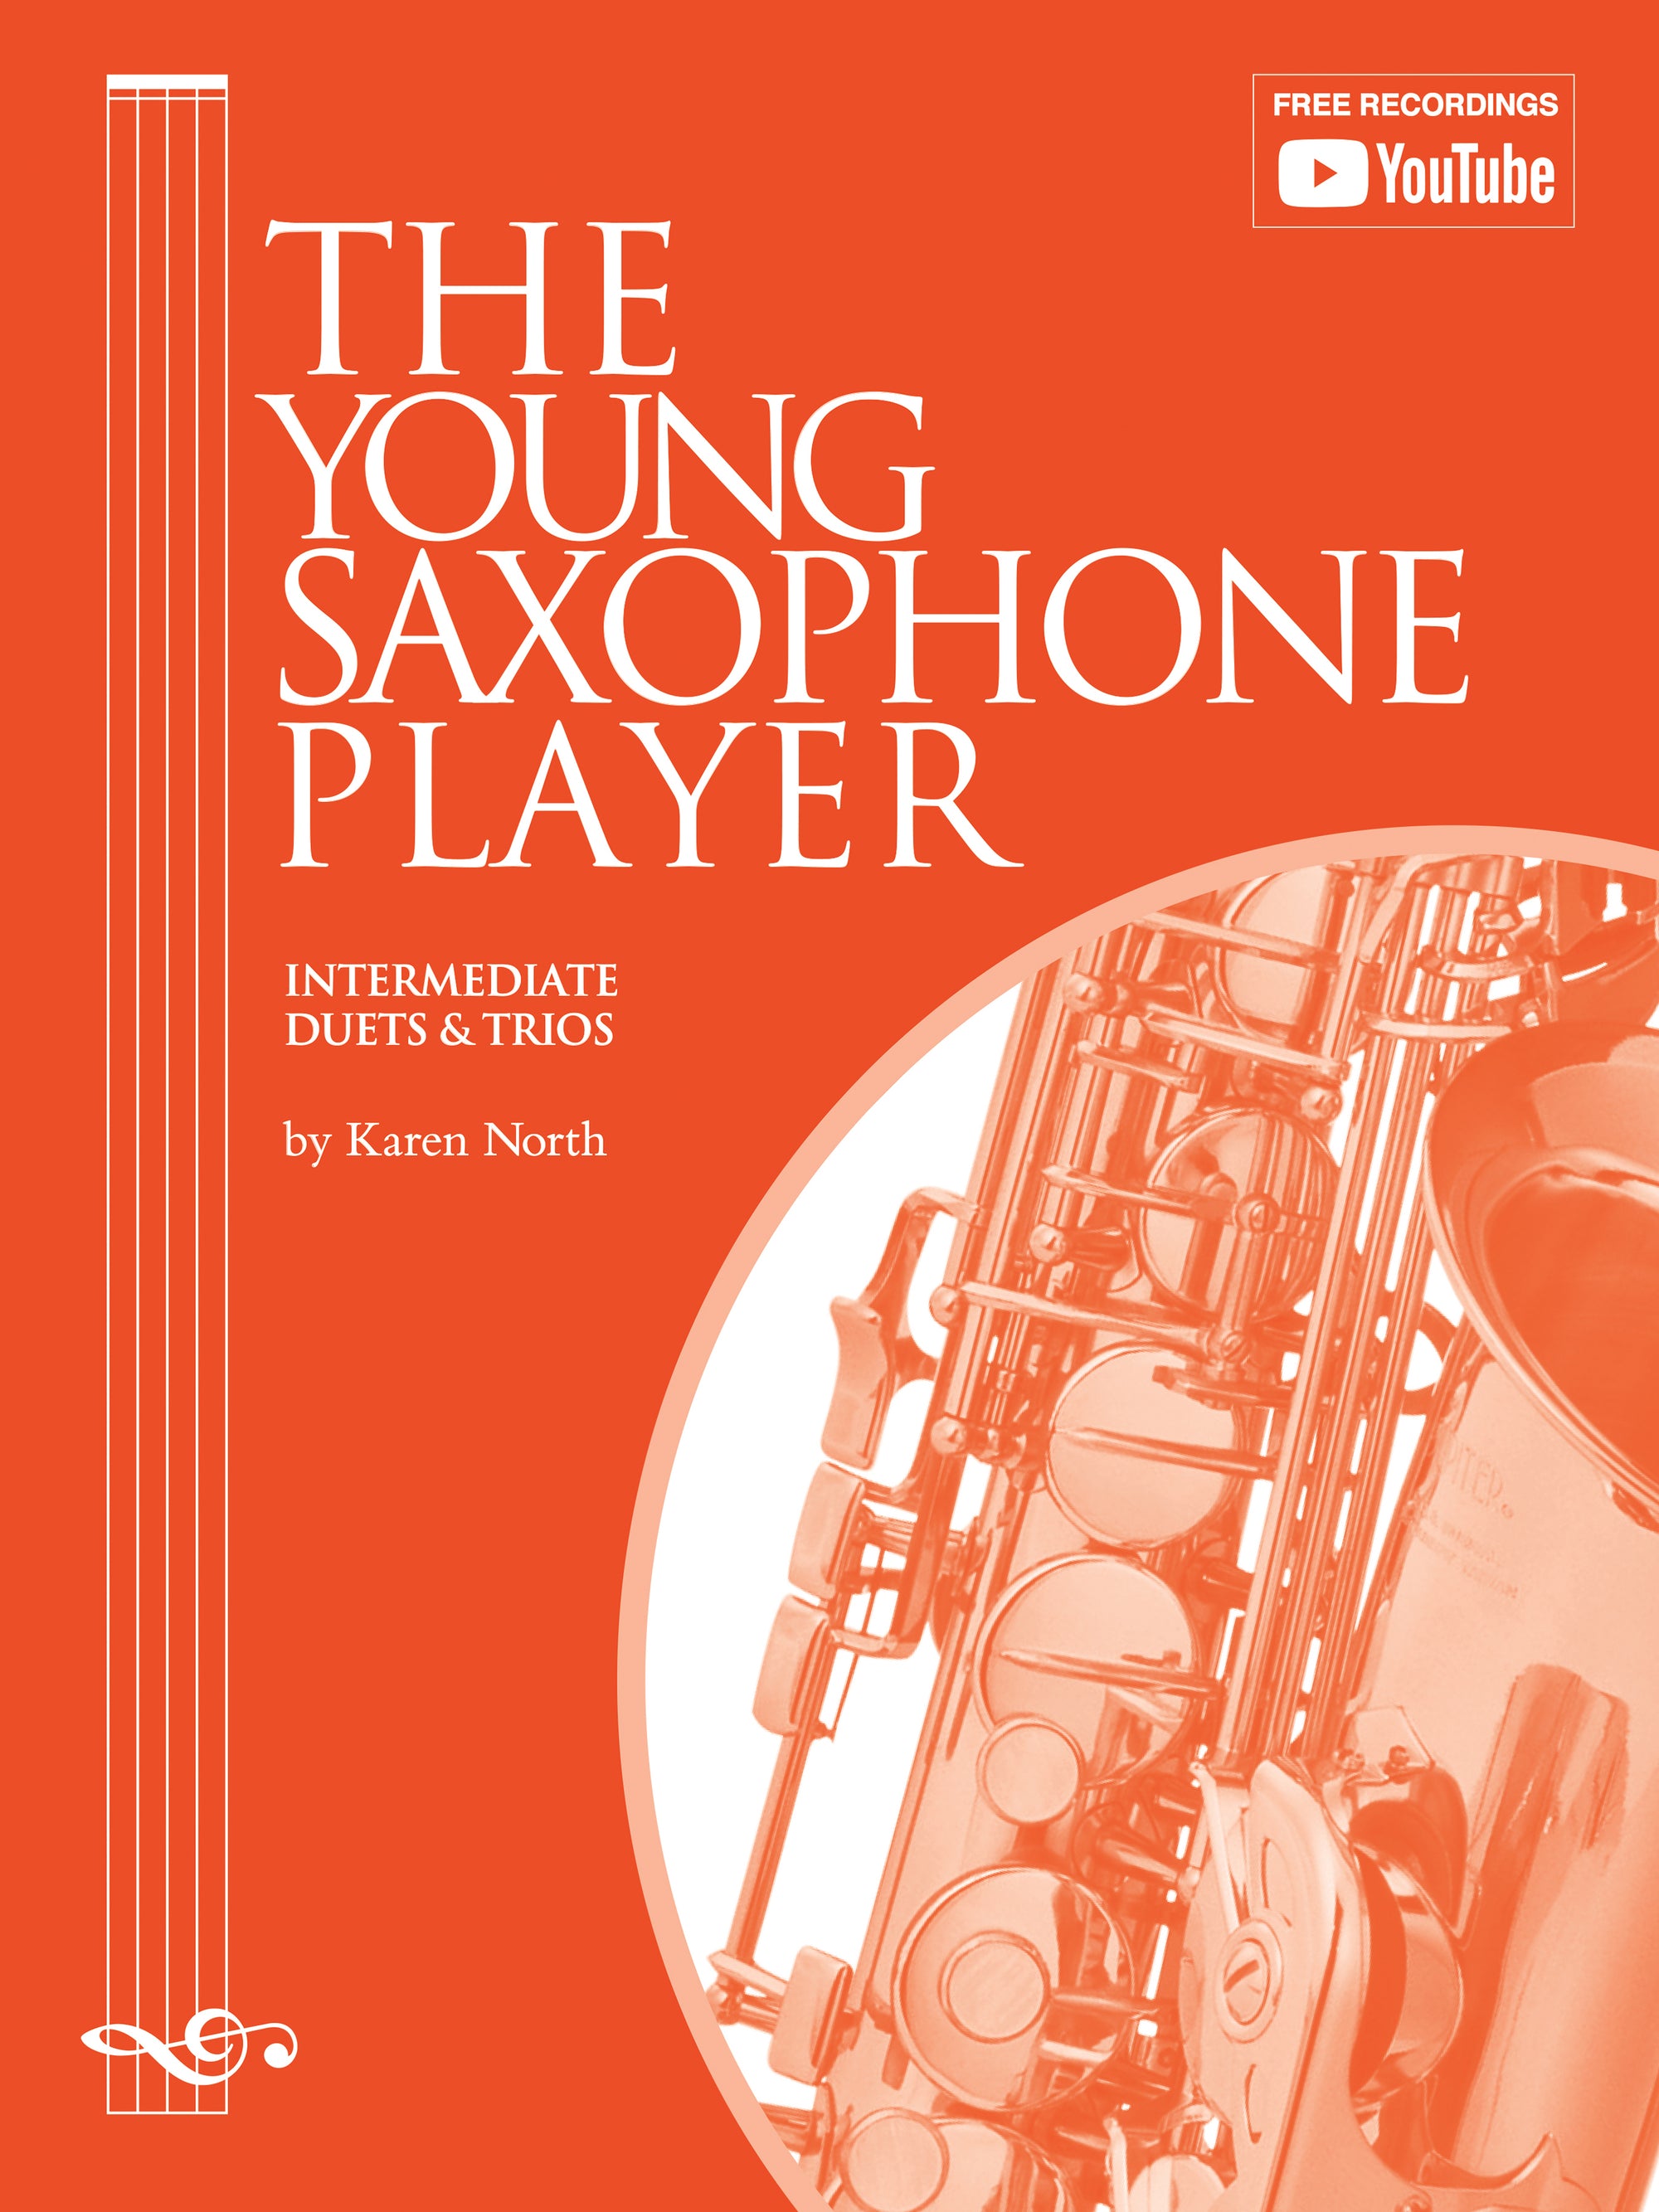 The Young Saxophone Player - Intermediate Duets & Trios